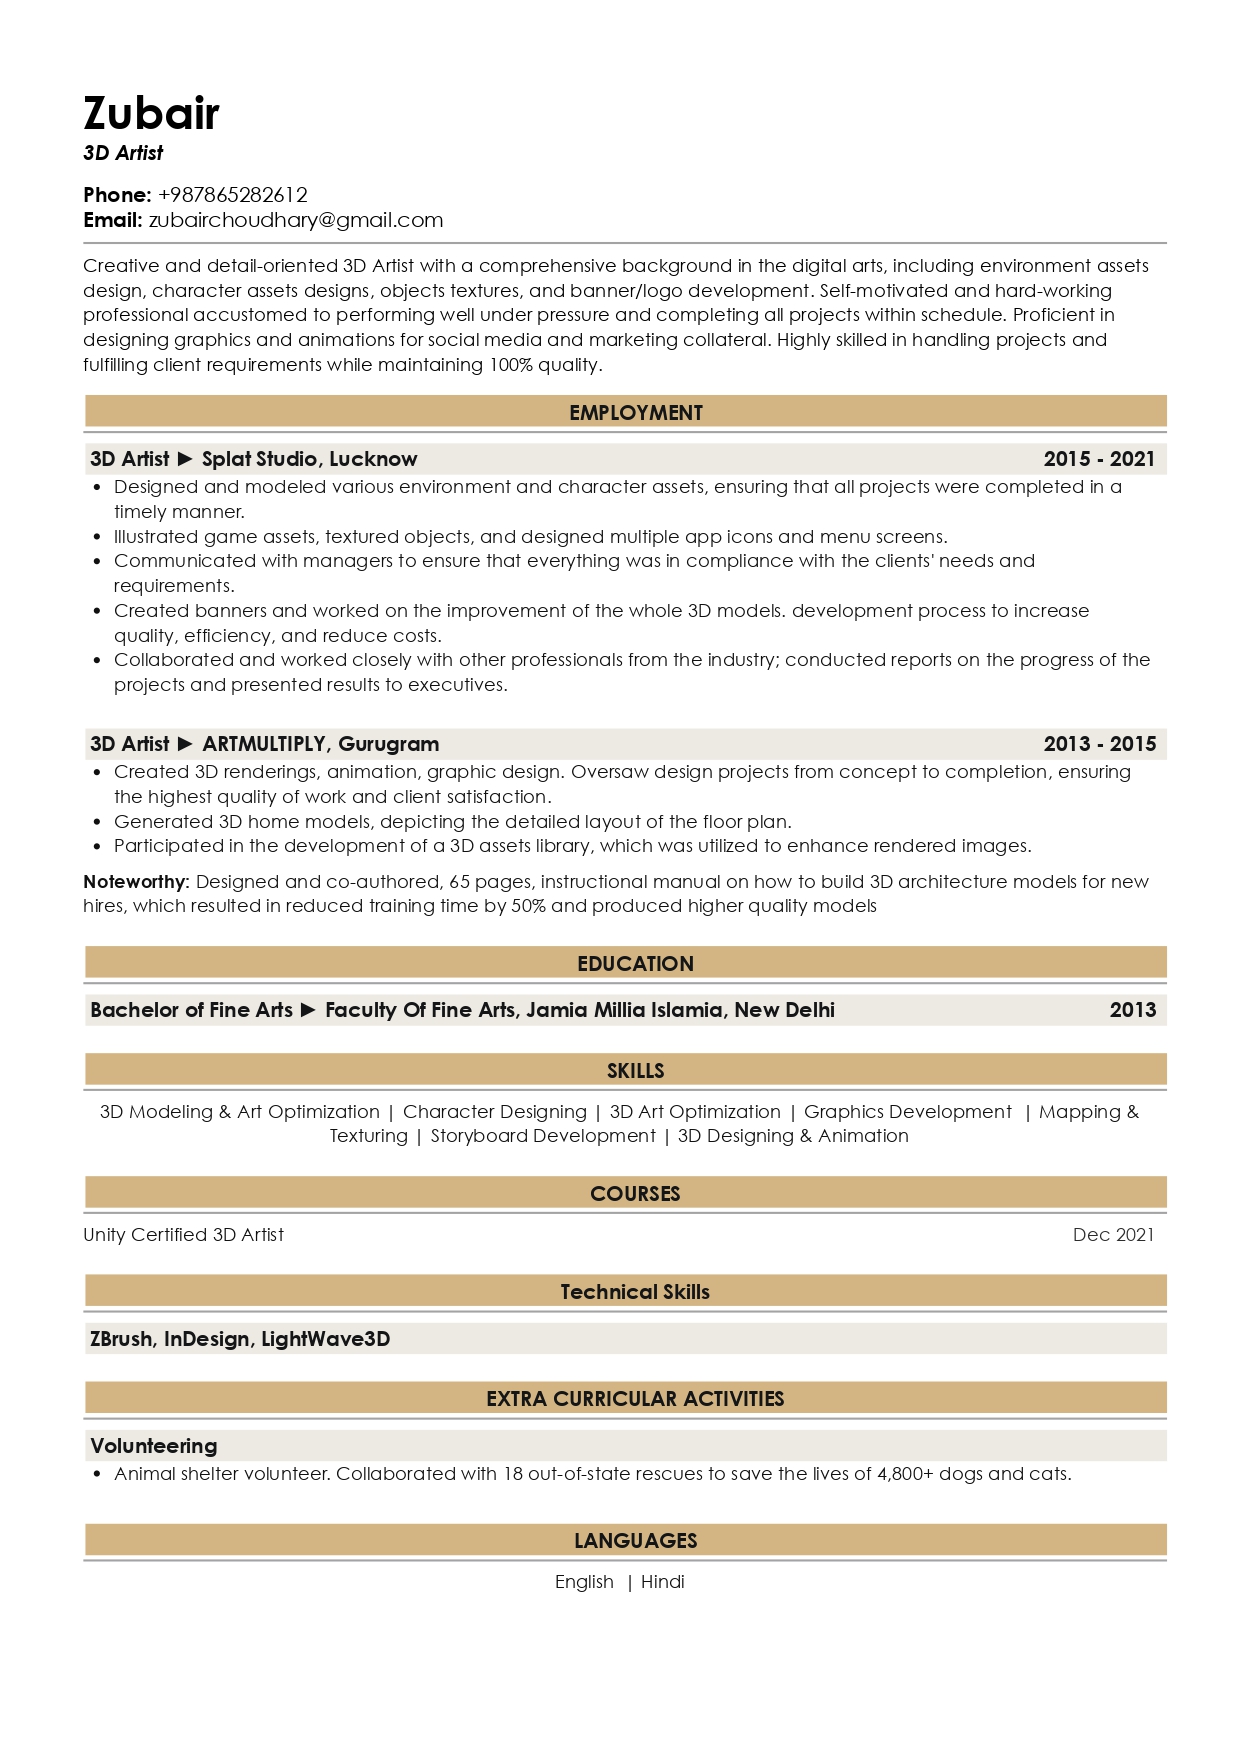 Sample Resume of 3D Artist with Template & Writing Guide 